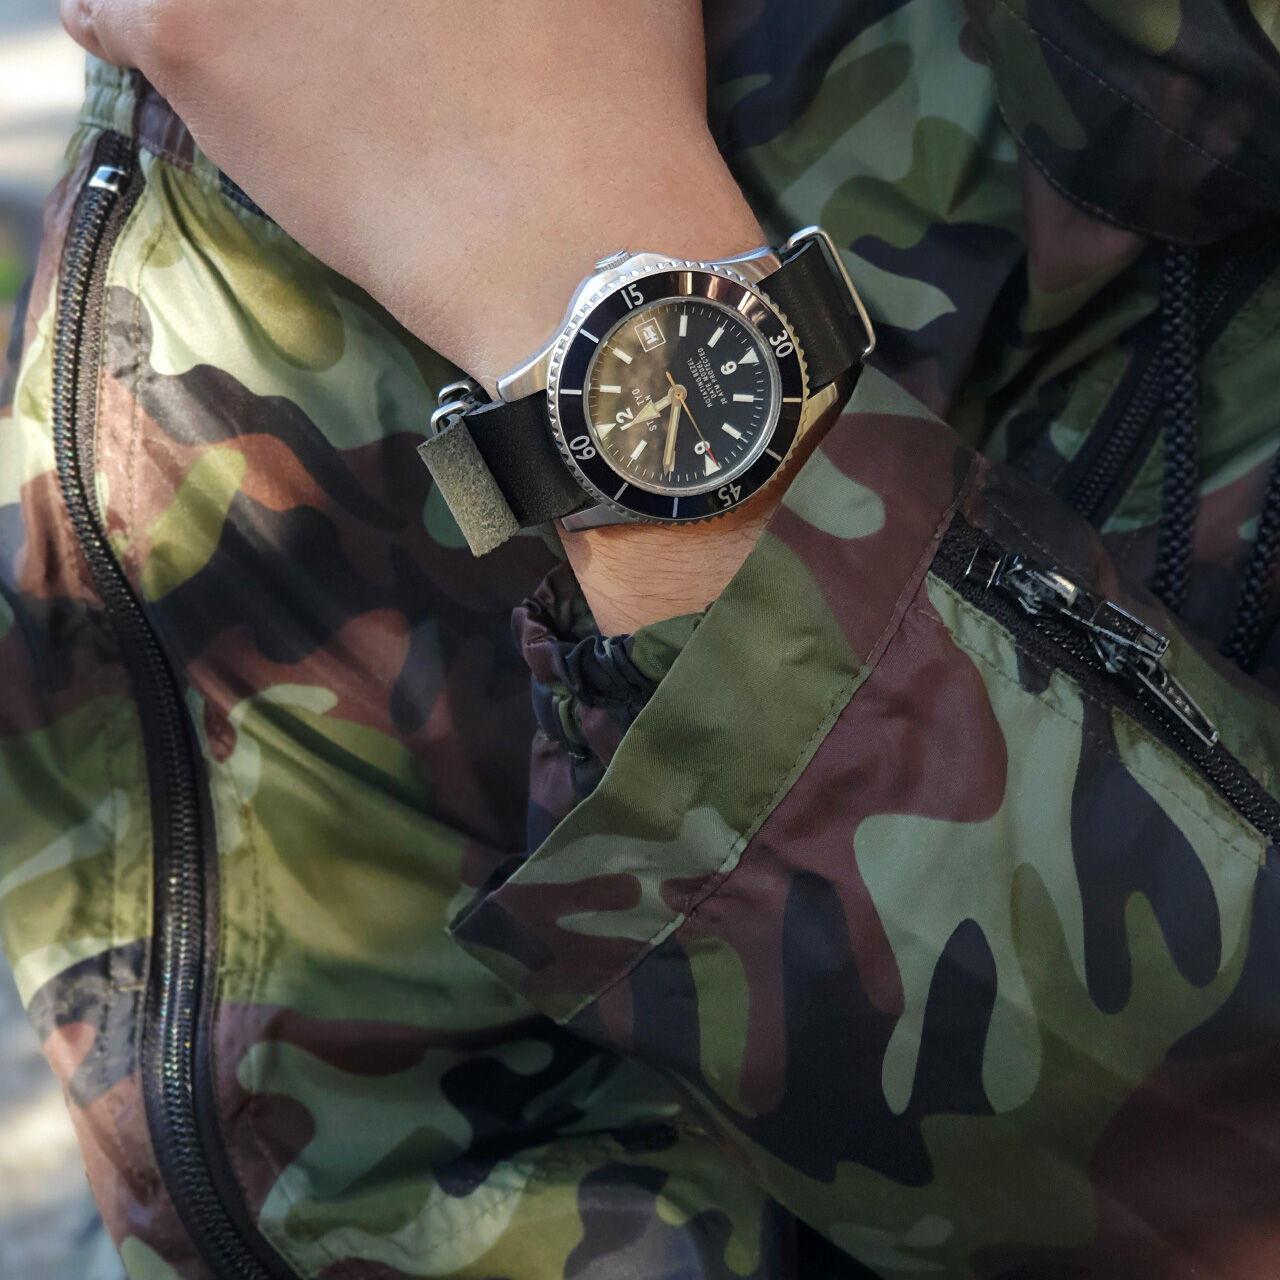 STAG TYO Military watch TYPE 1976